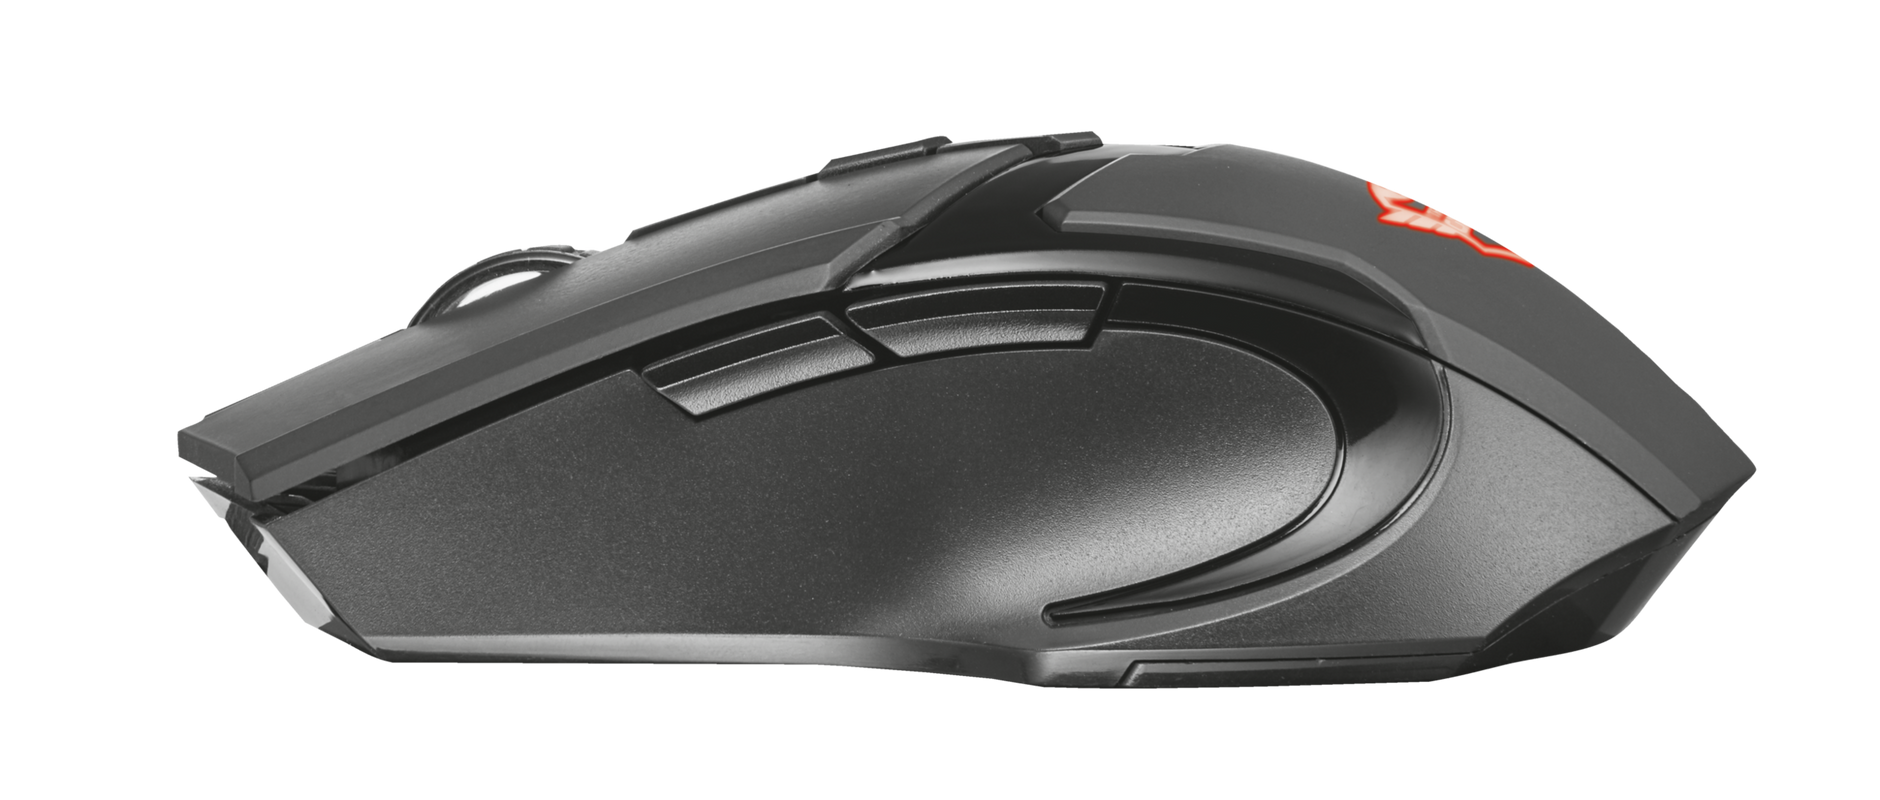 GXT 103 Gav Wireless Gaming Mouse-Side